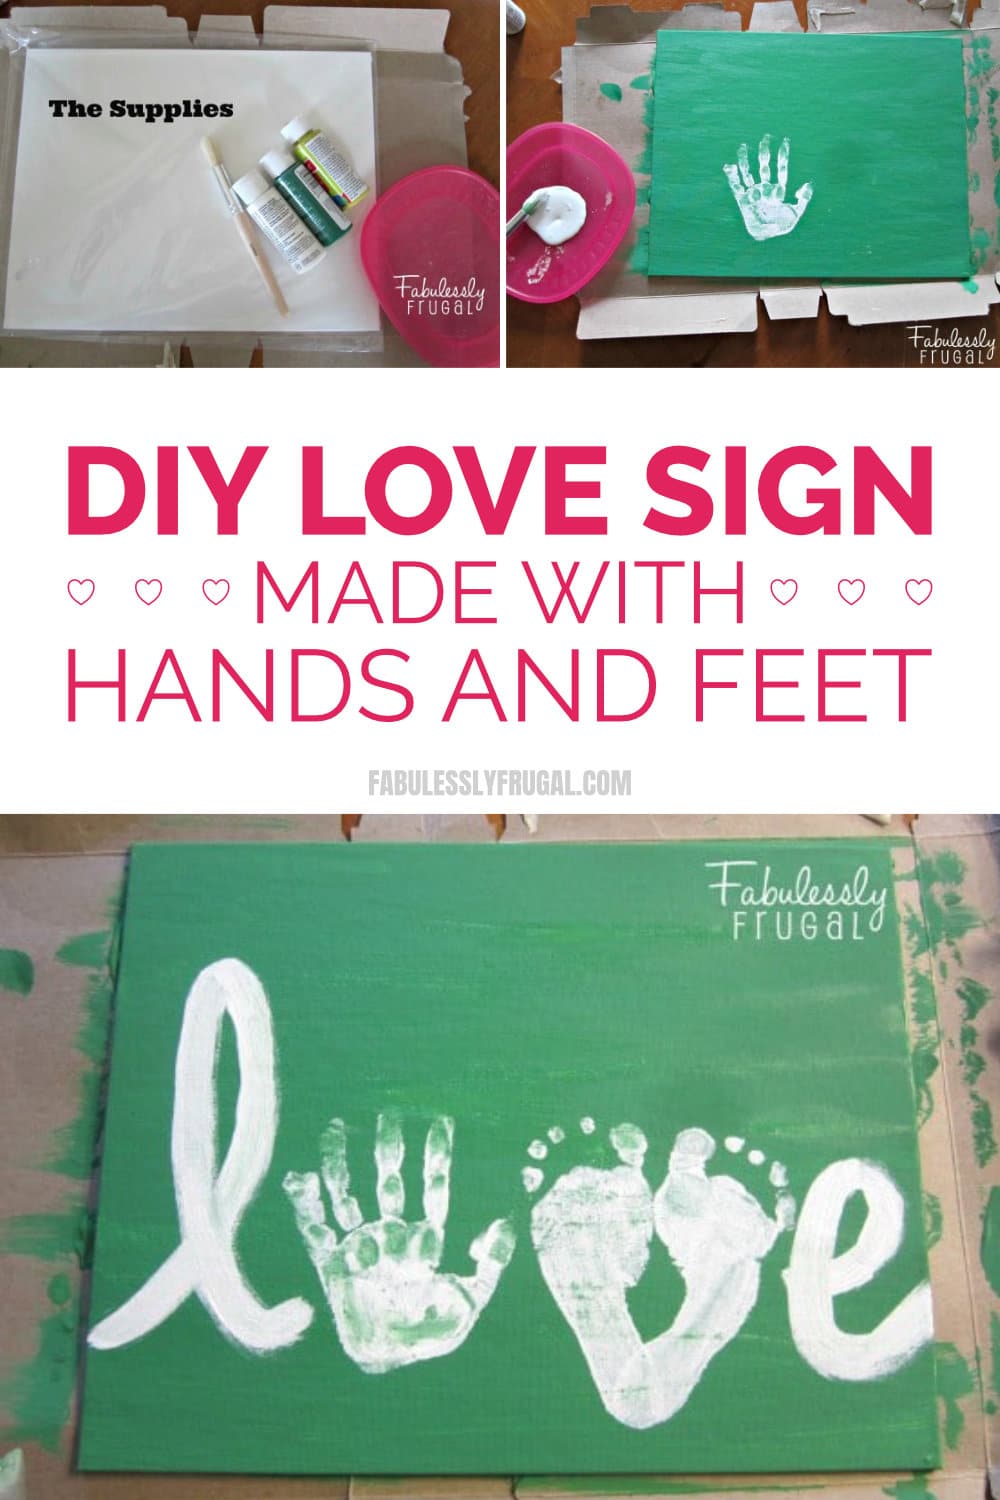 DIY love sign with hands and feet